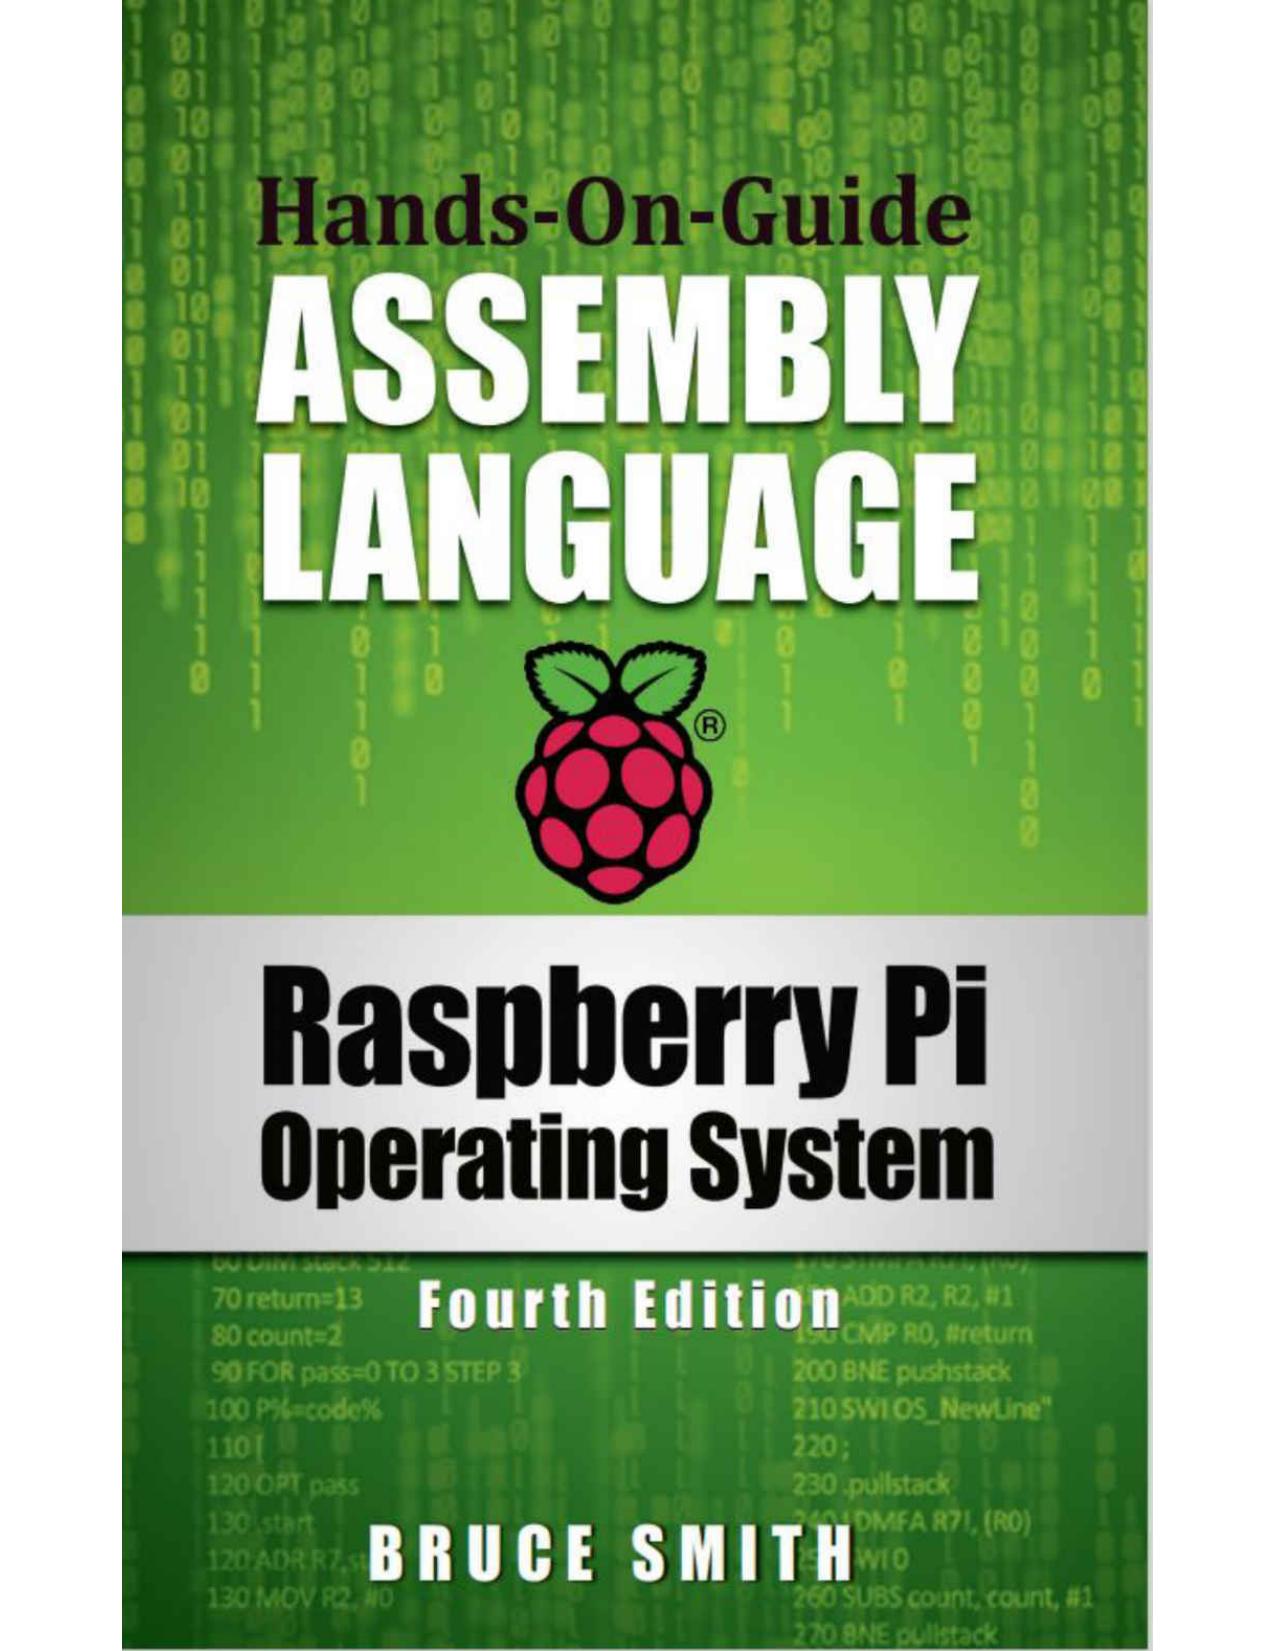 Raspberry Pi Operating System Assembly Language: Hands-On-Guide by Bruce Smith